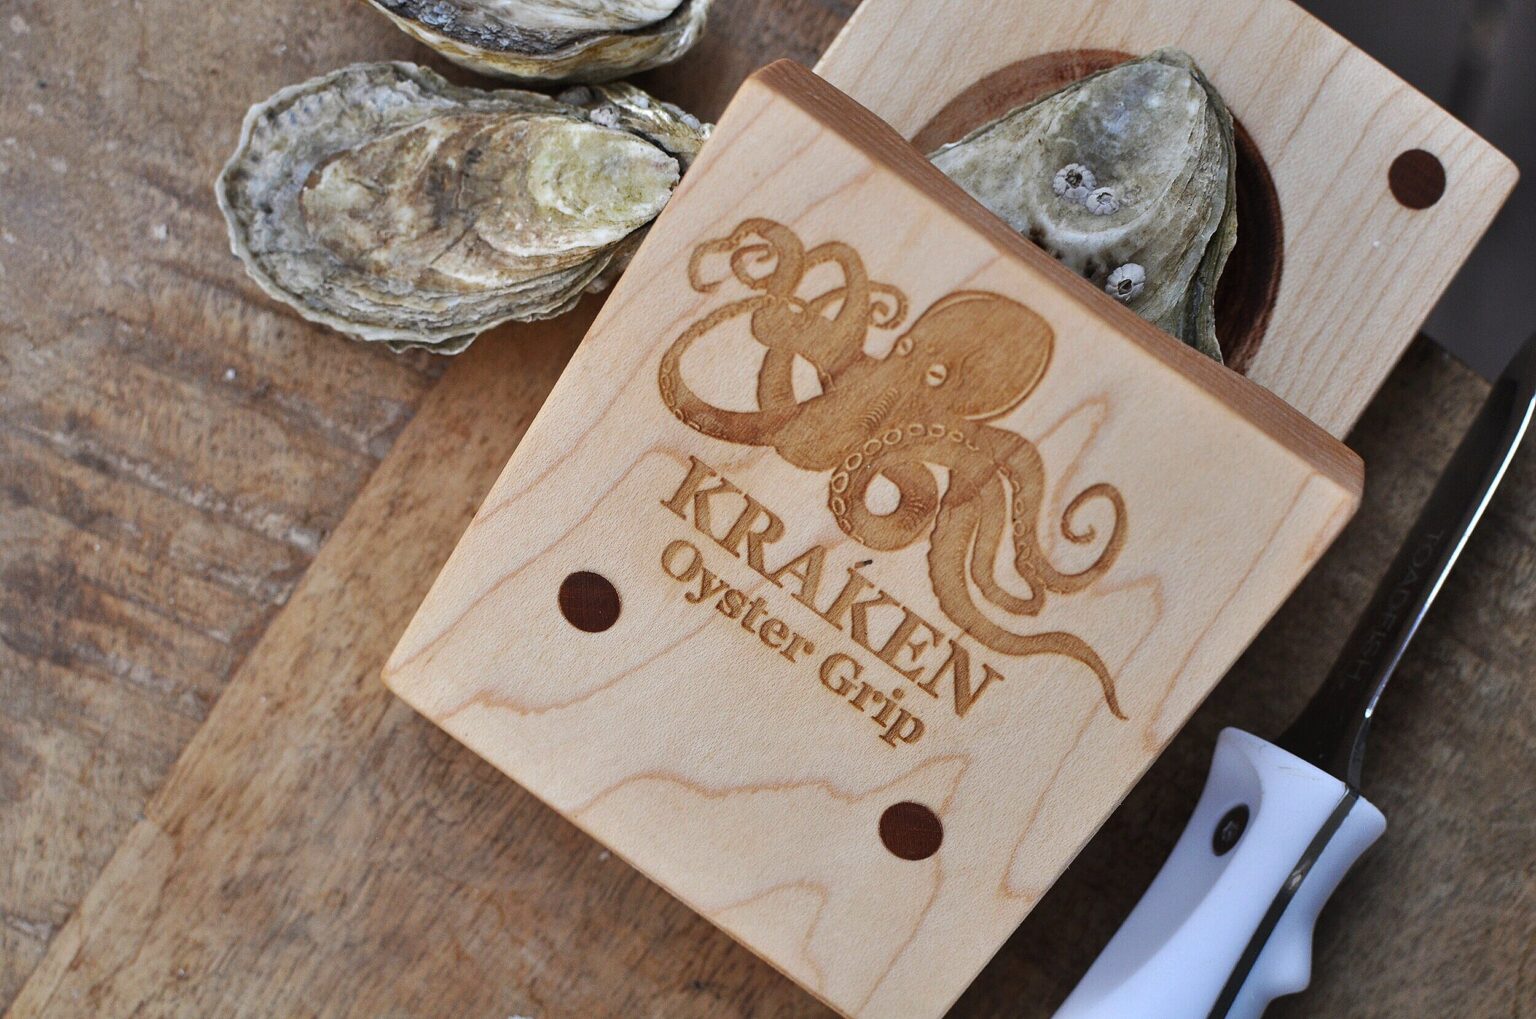 When Craftsmanship and Utility Make for the Perfect Shuck: The KRAKEN Oyster Grip